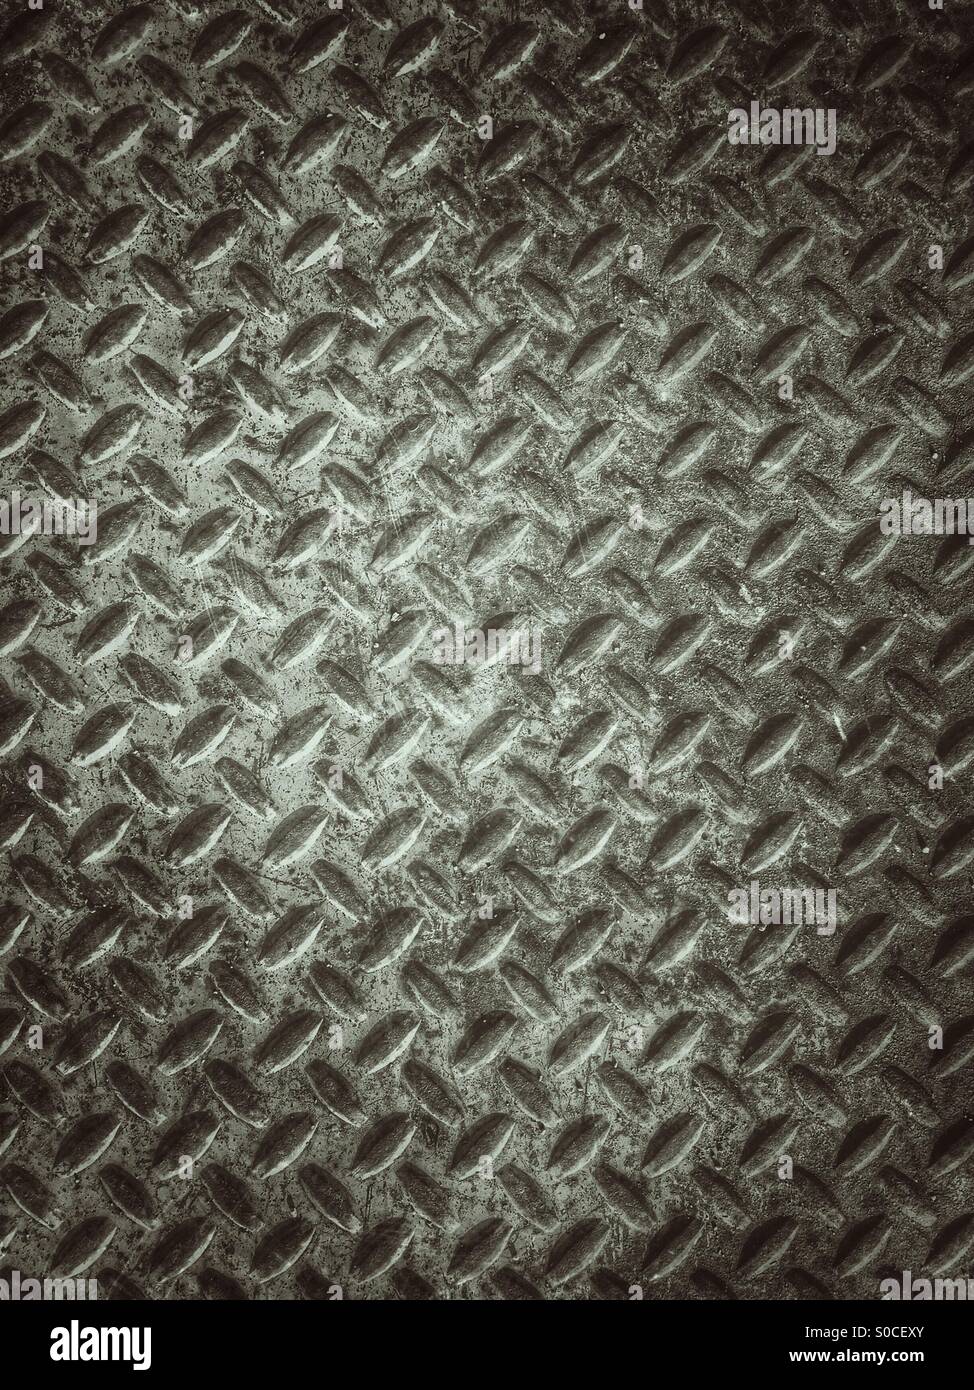 Plate Of Solid Steel Metal Sheet Background With Diamond Pattern Stock Photo